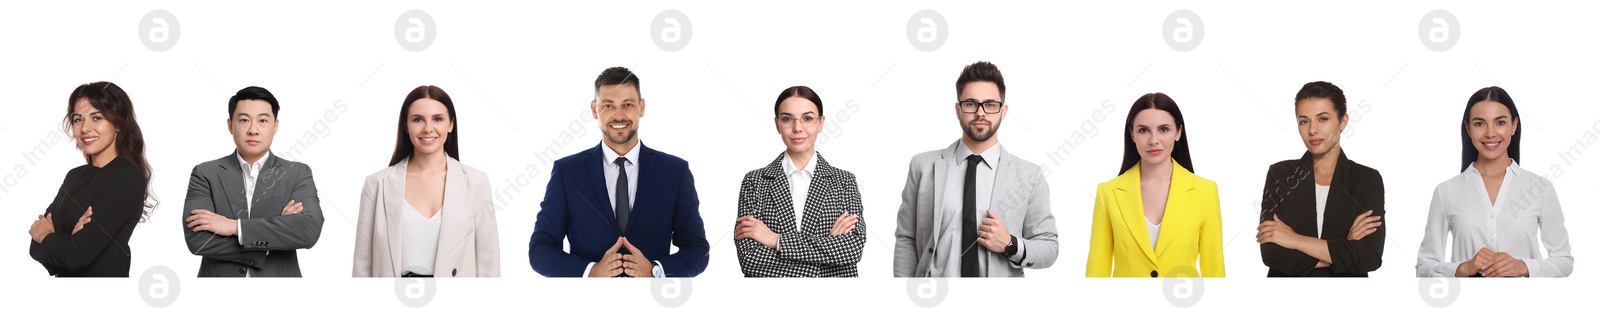 Image of Collage with photos of different businesspeople on white background